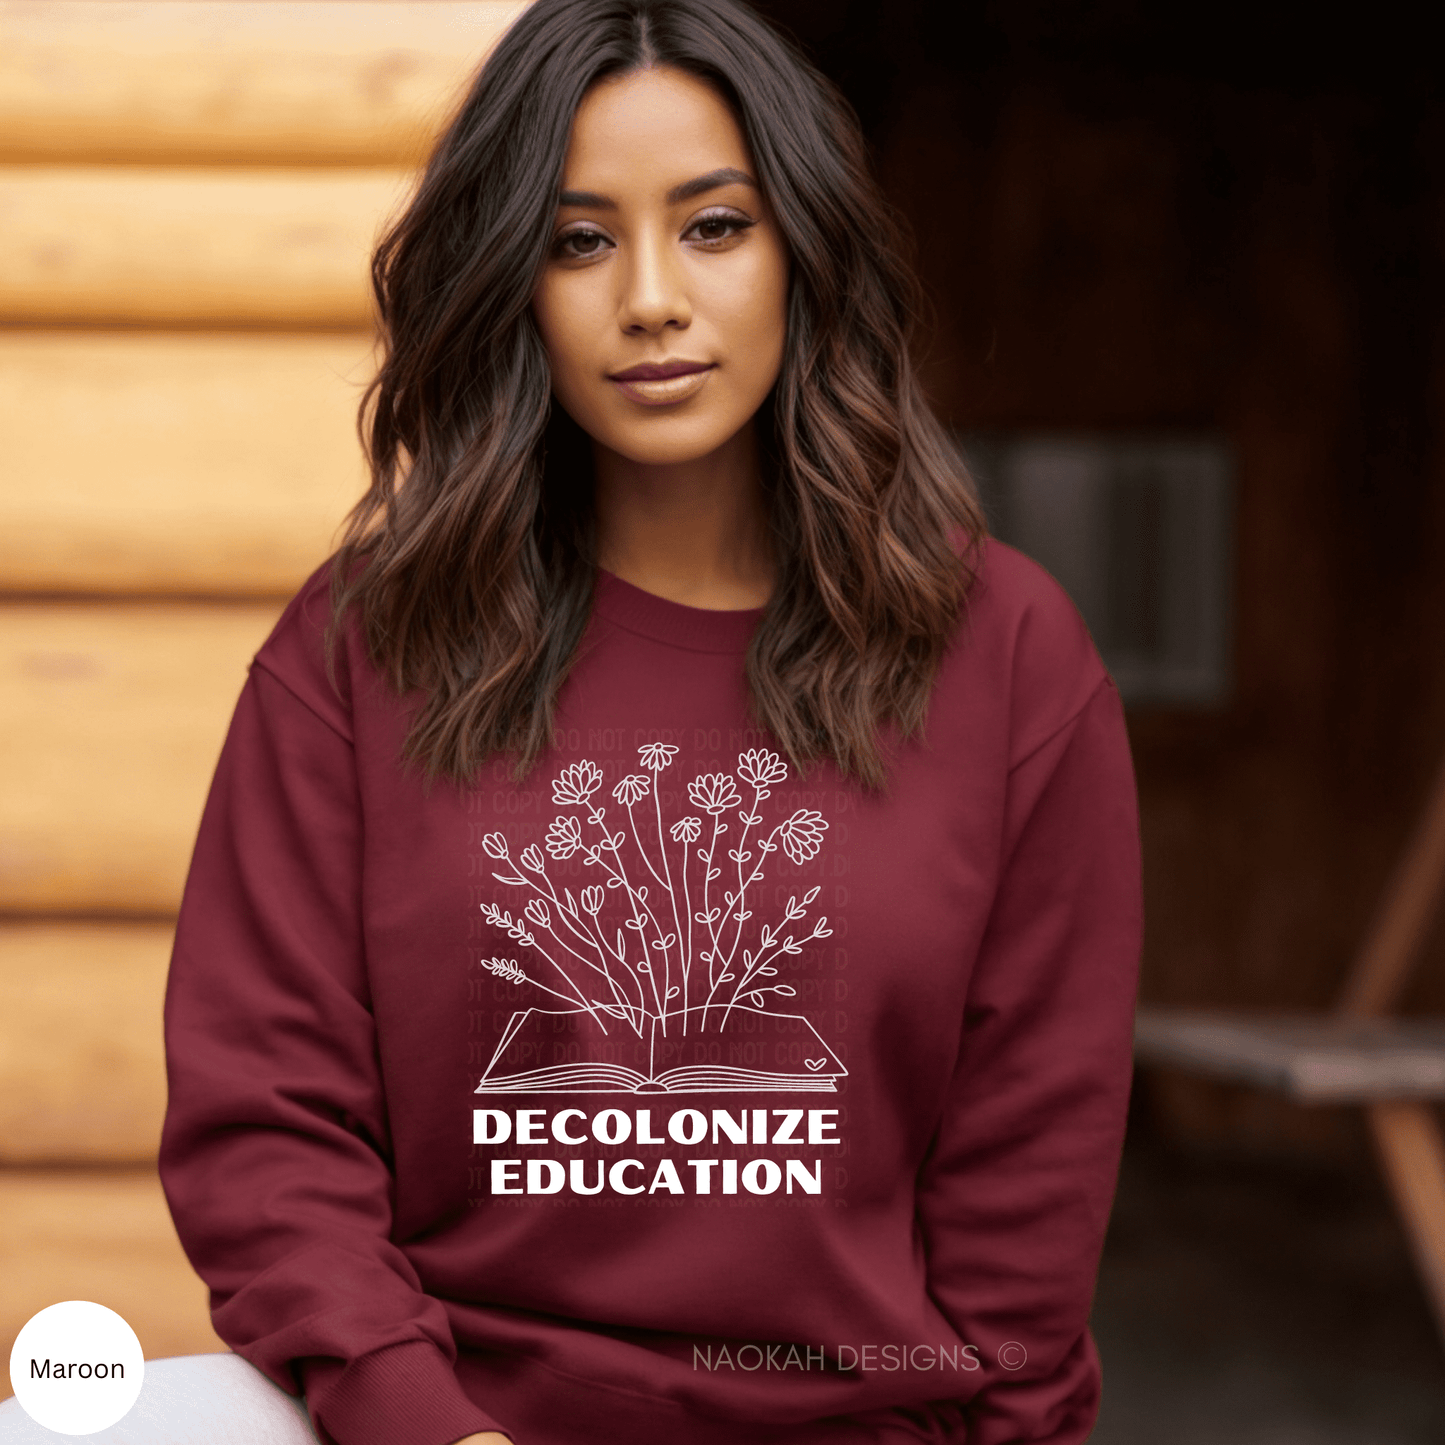 decolonize education wildflower book sweatshirt hoodie, decolonize shirt, ancestral teaching, indigenous, native pride, you are on native land, you are on indigenous land, colonialism, native teaching, indigenous owned, anti racist, anti colonialism, native american shirt, social justice shirt, no one is illegal, mmiw, decolonize anthropology, dismantle systems of oppression